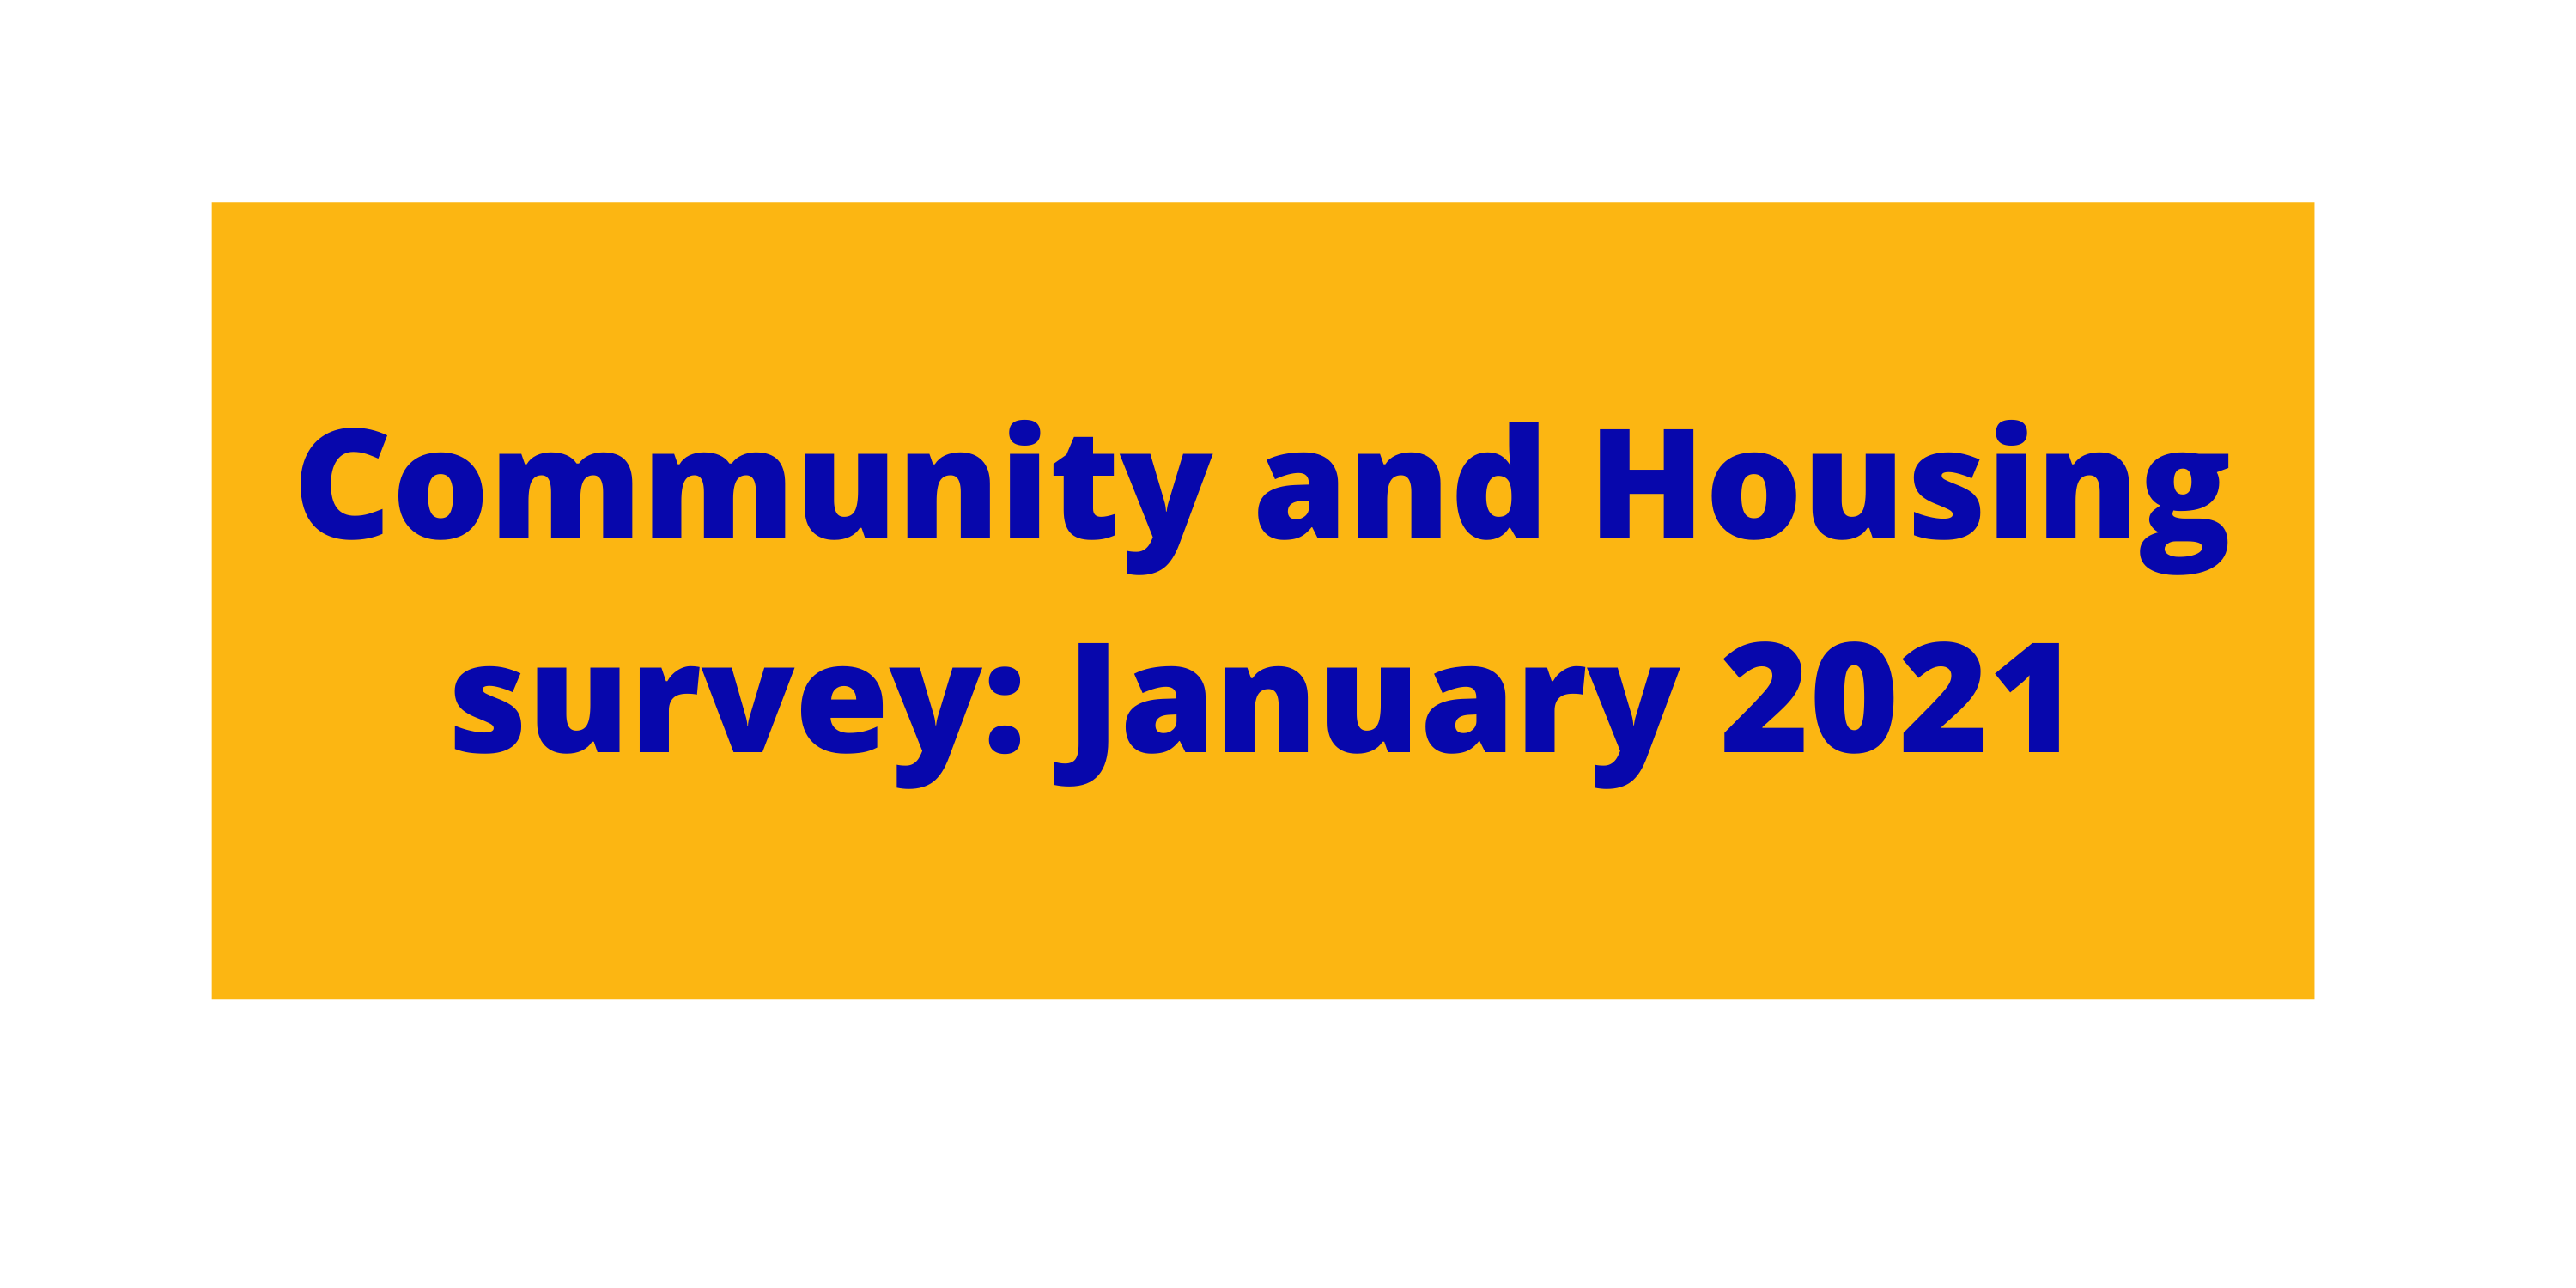 libk to community and housing survey